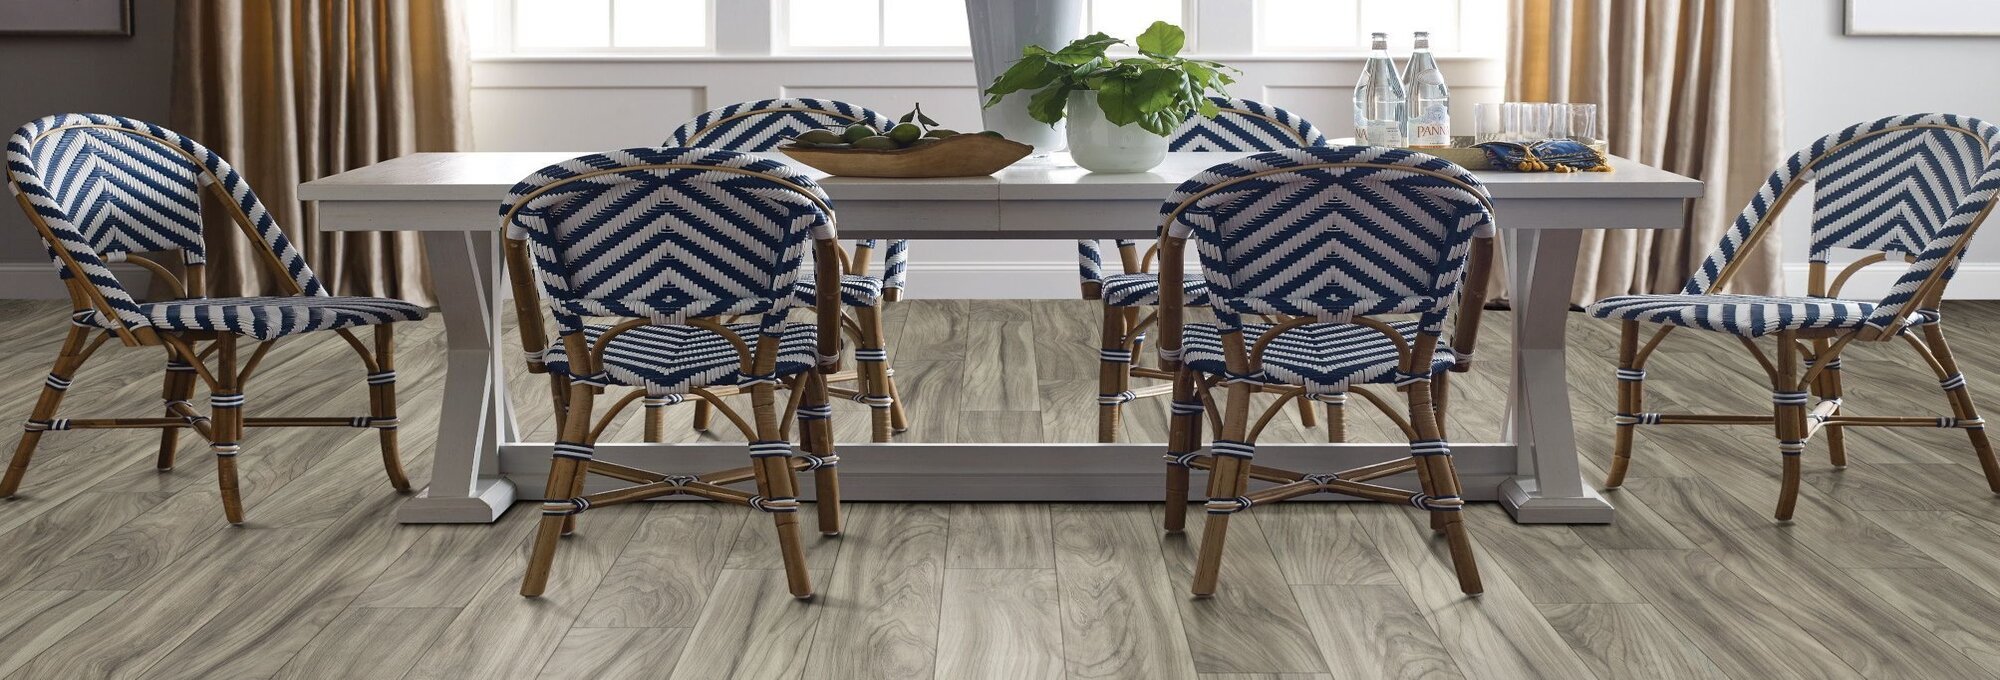 Chairs and table on laminate - Floor Decor Inc in Upland